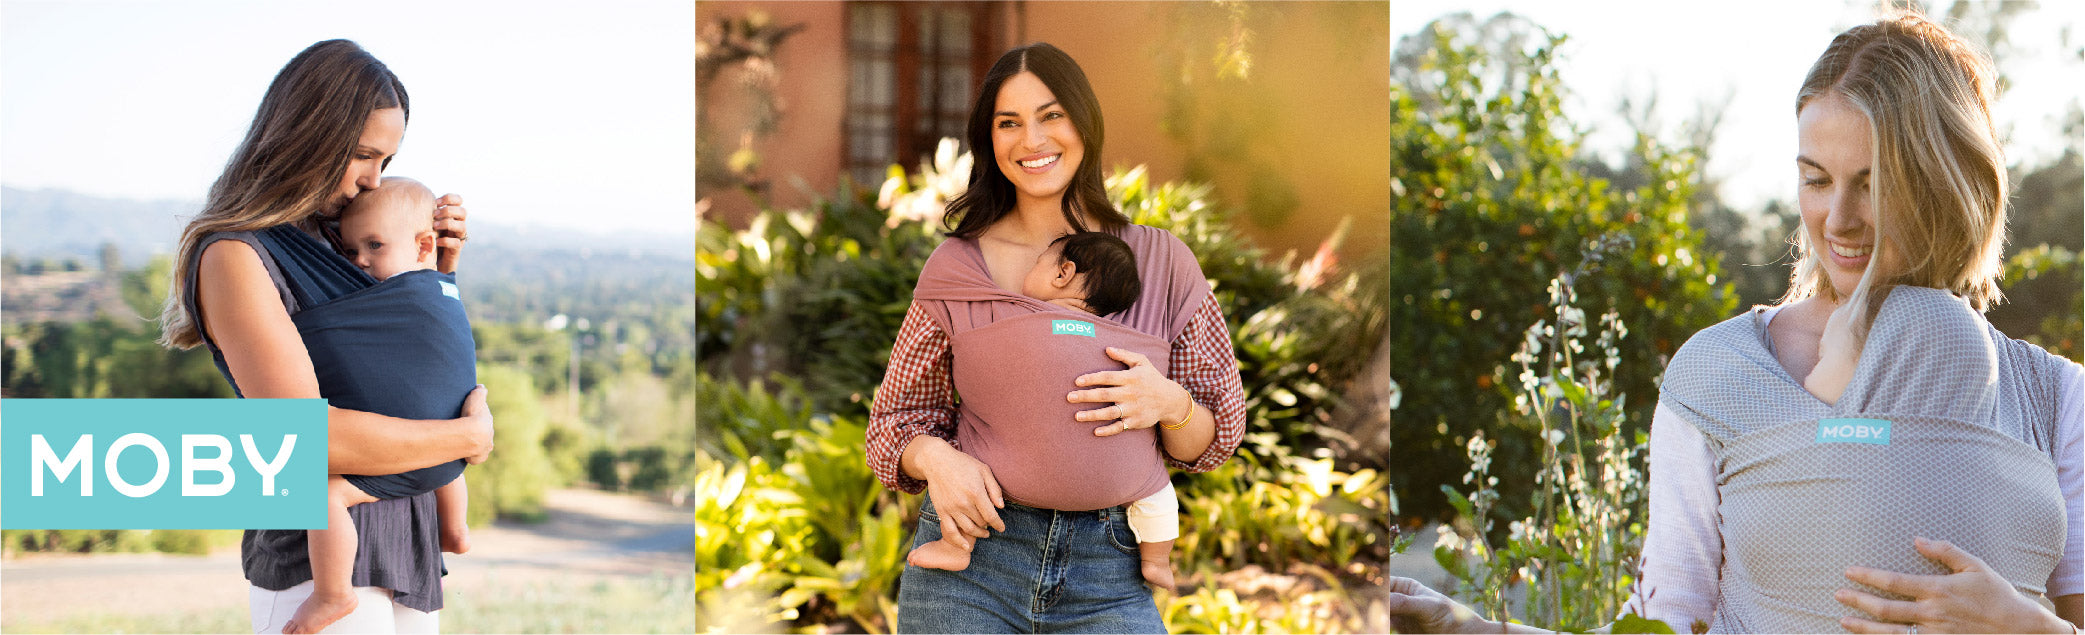 Belly Beyond supply MOBY's leading range of baby wraps. Feel the freedom and bond for life!